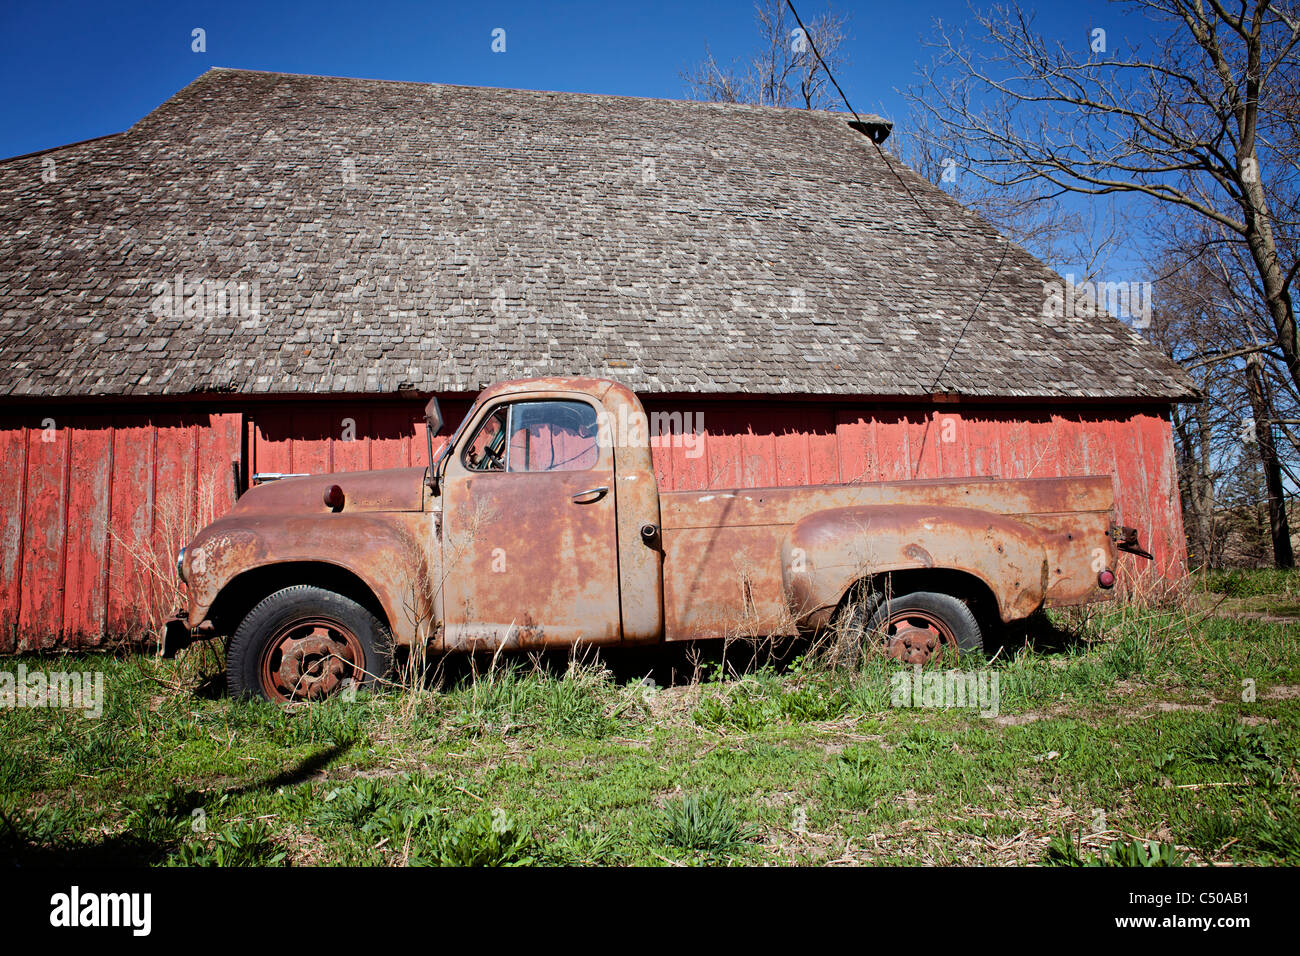 Old rusted truck sitting in front of old red barn in Iowa. Stock Photo